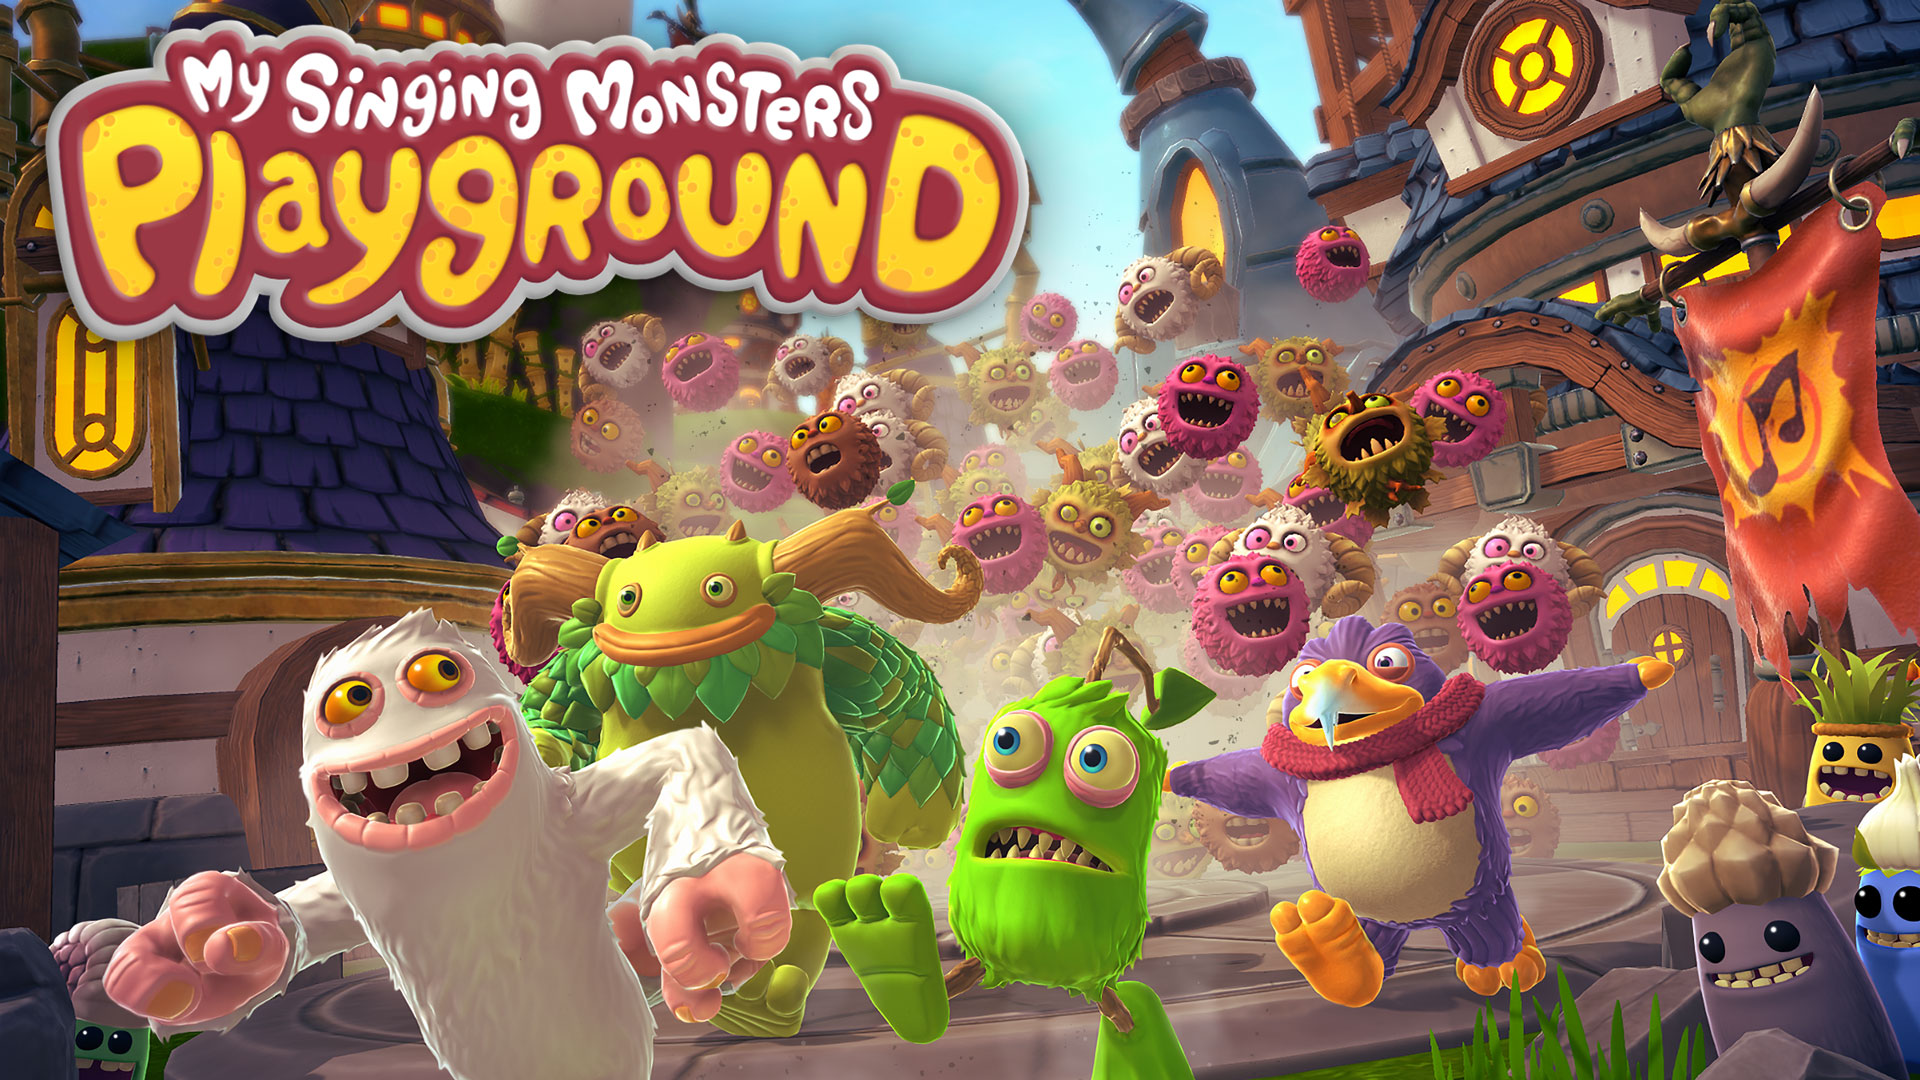 Video For It’s the Singing Monsters Like You’ve Never Seen Them